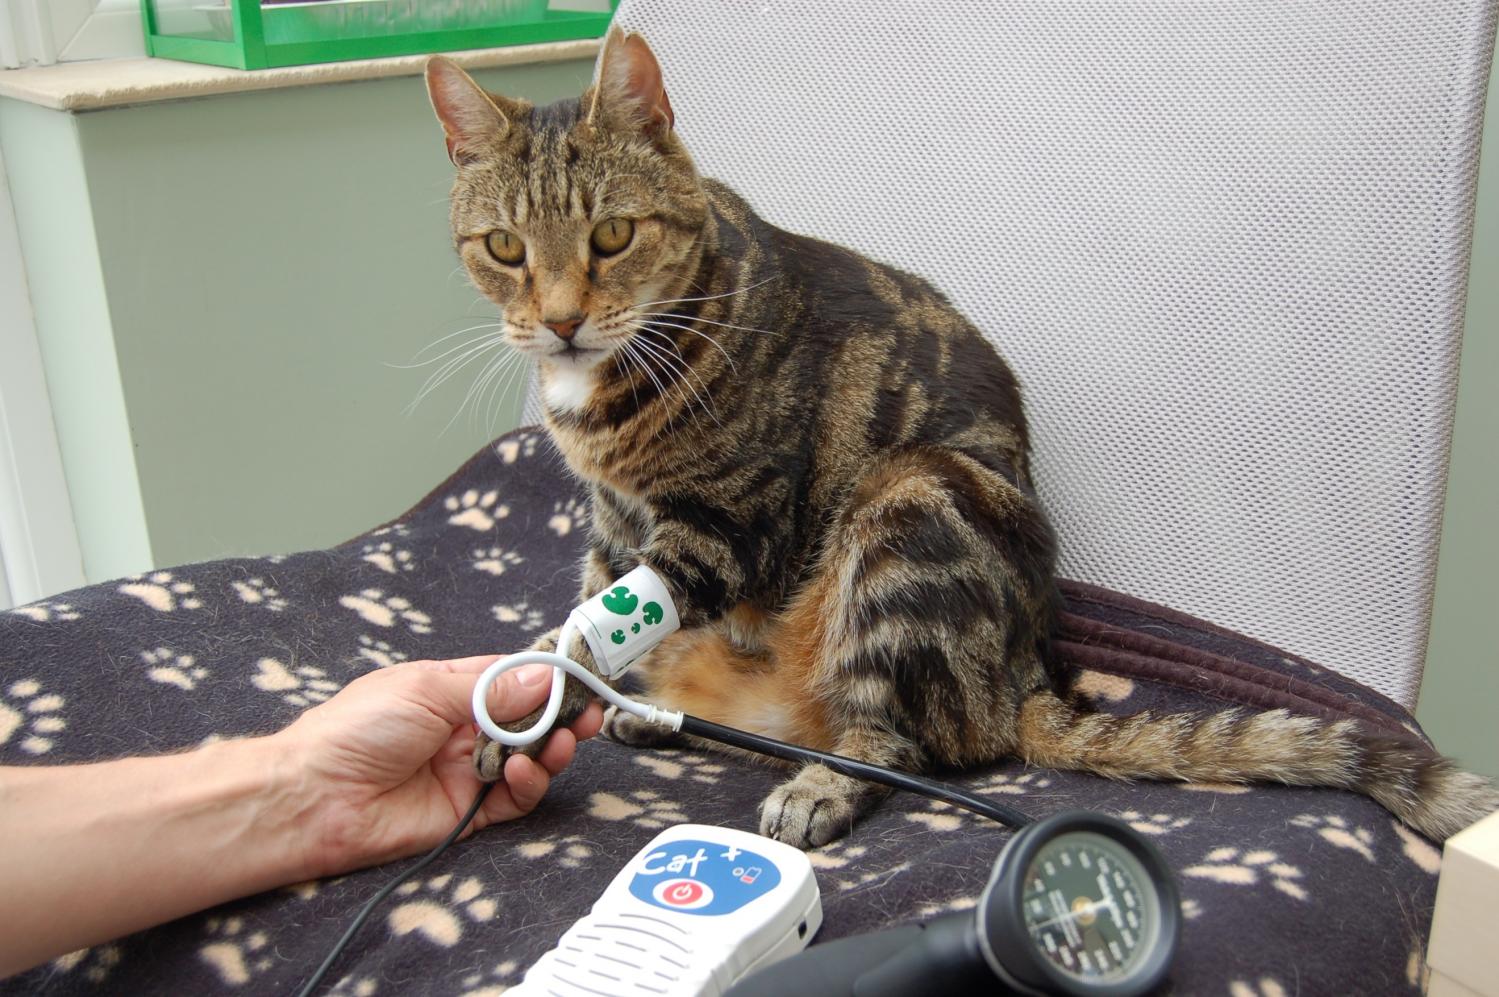 High Blood Pressure in Cats: Understanding, Diagnosing, and Managing Hypertension - Mnepo Pets